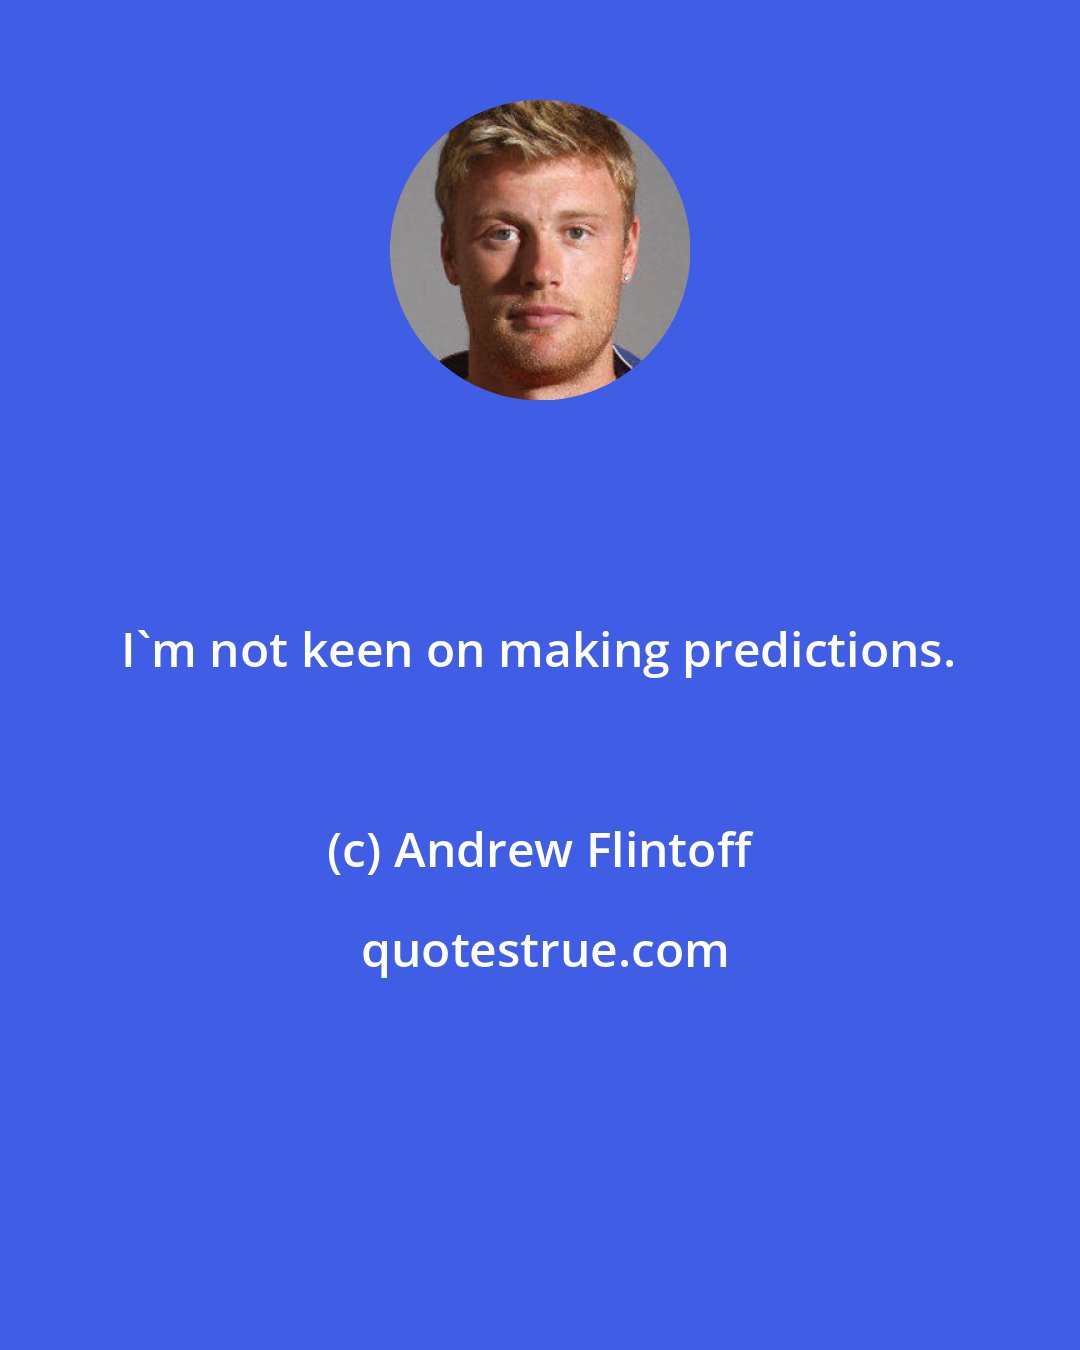 Andrew Flintoff: I'm not keen on making predictions.